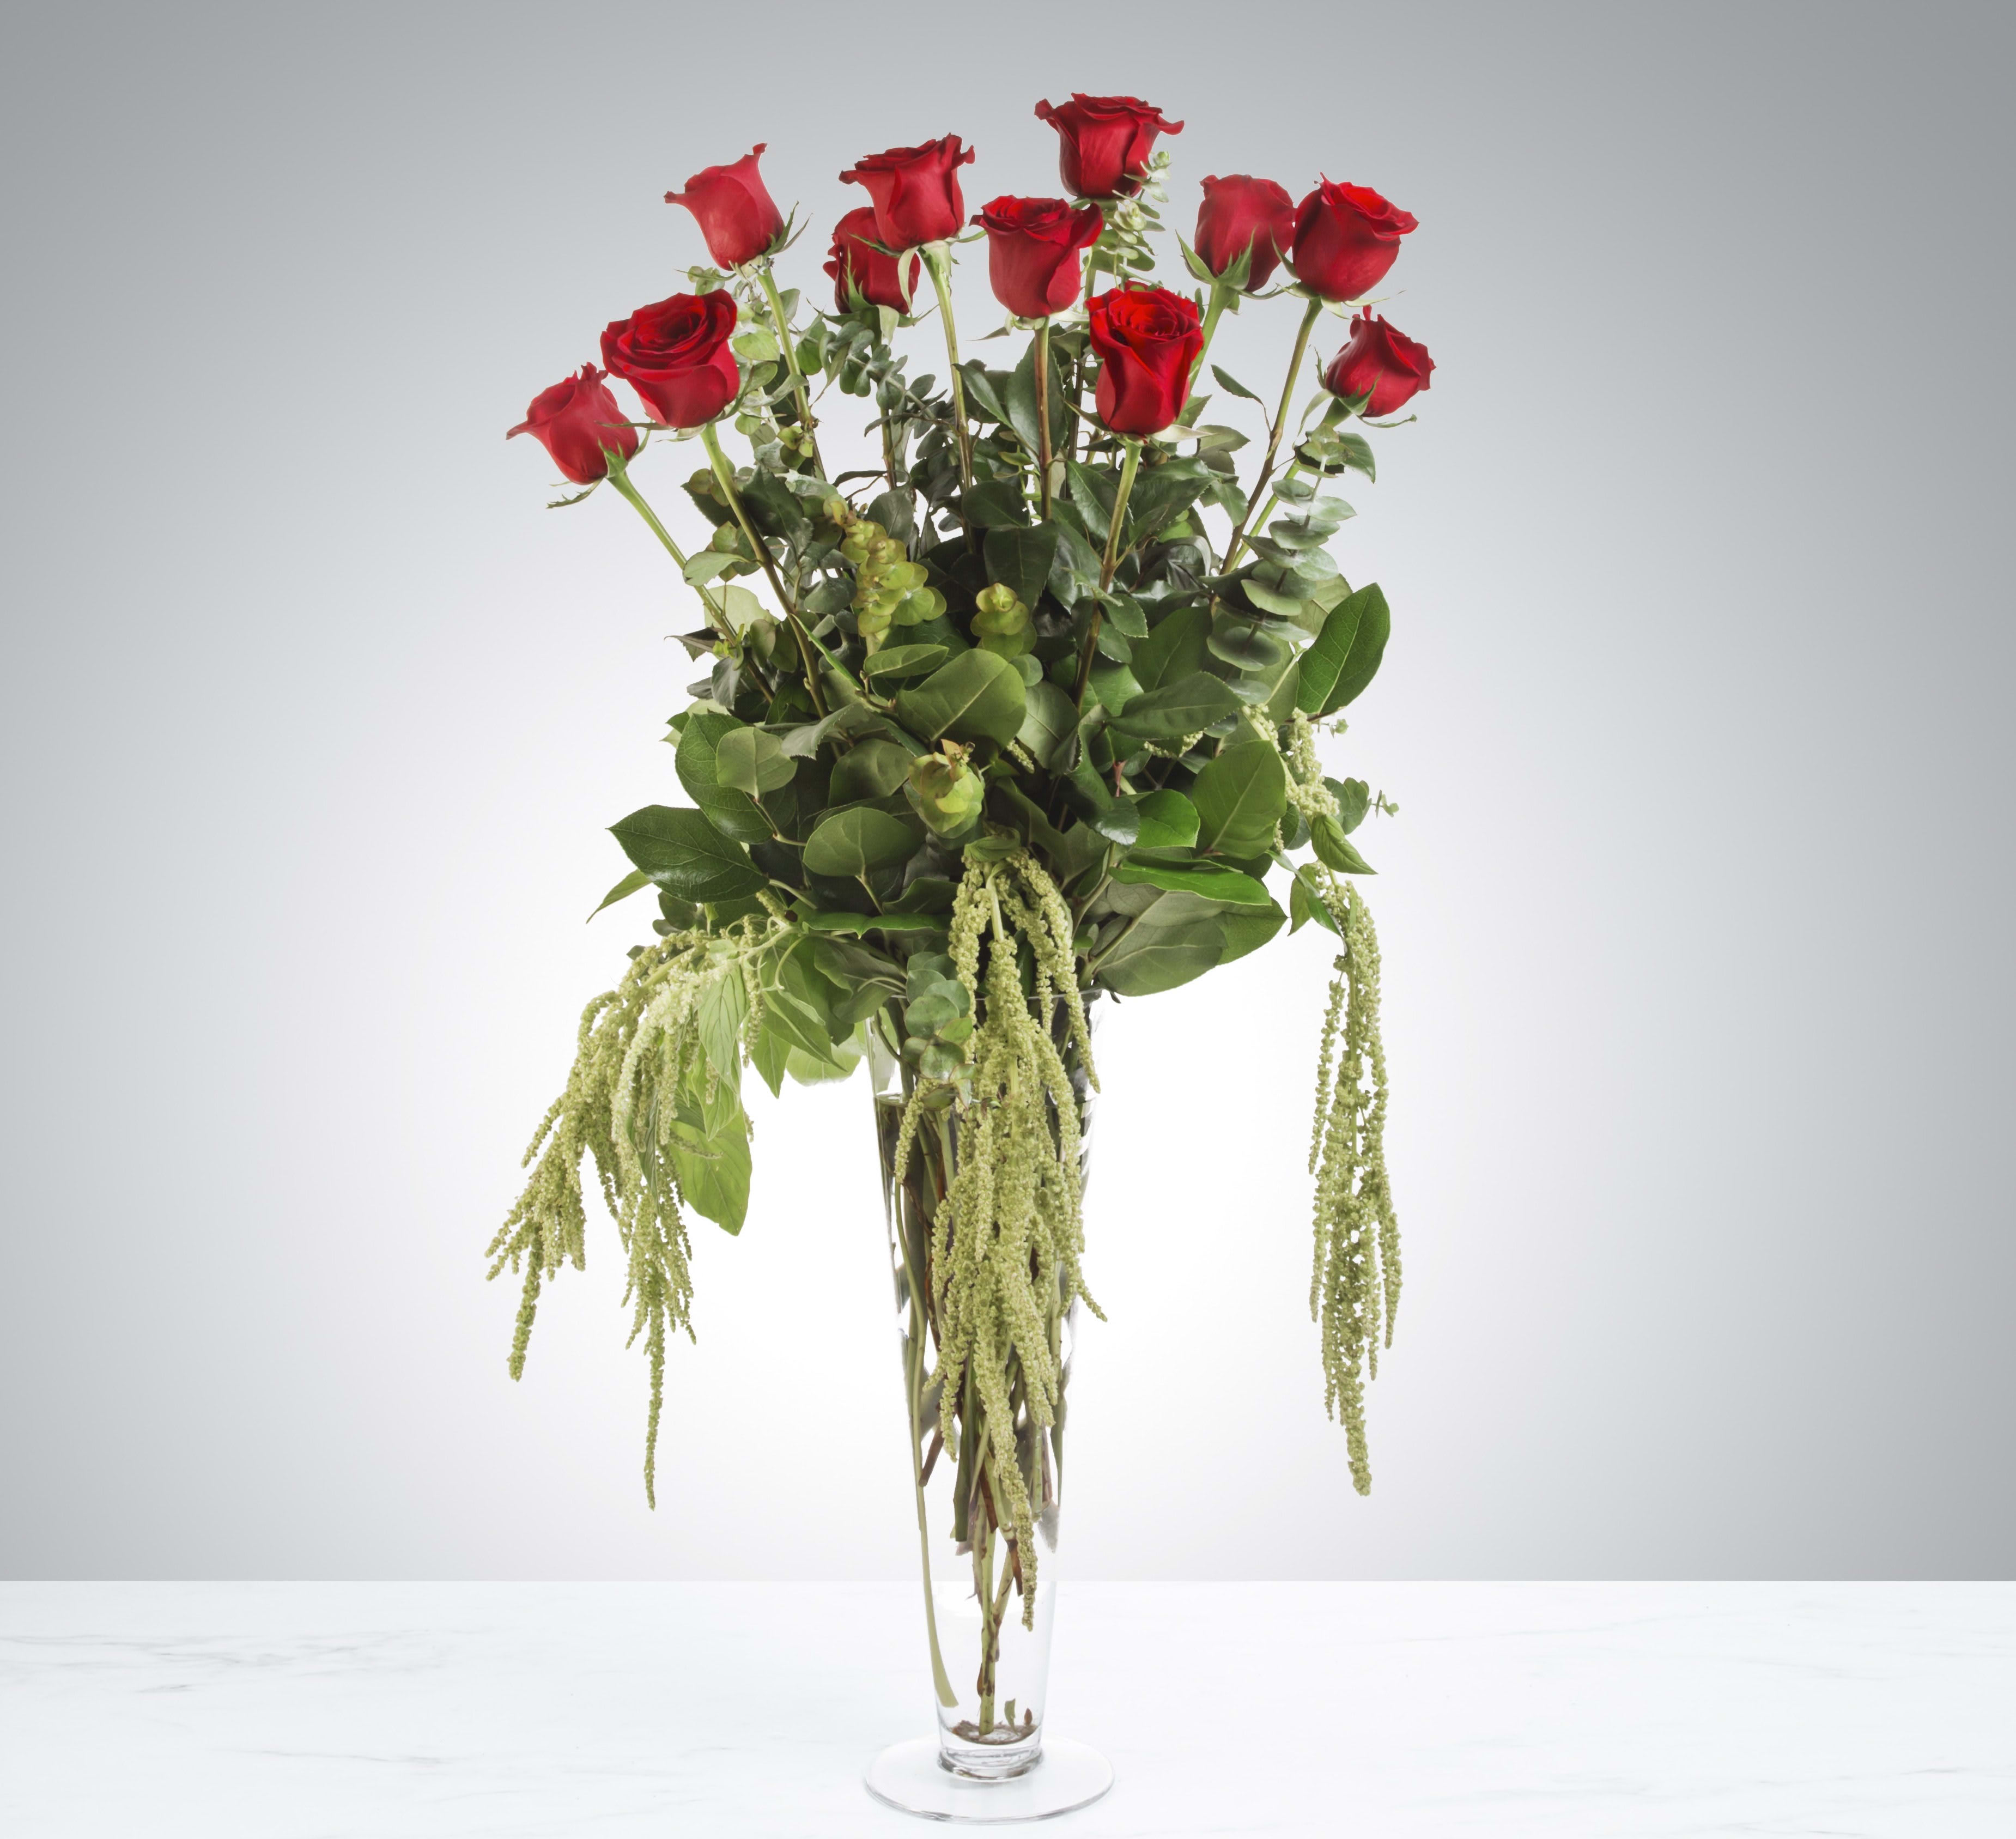 Forever Type of Love by BloomNation™ - Make a statement with this dramatic arrangement. With a tall vase and modern greens, this mix of the classic 12 dozen roses with a gothic romance twist stands the test of time. Perfect for valentines day, anniversaries, or any type of romance.   APPROXIMATE DIMENSIONS: 11&quot; W x 25&quot; H